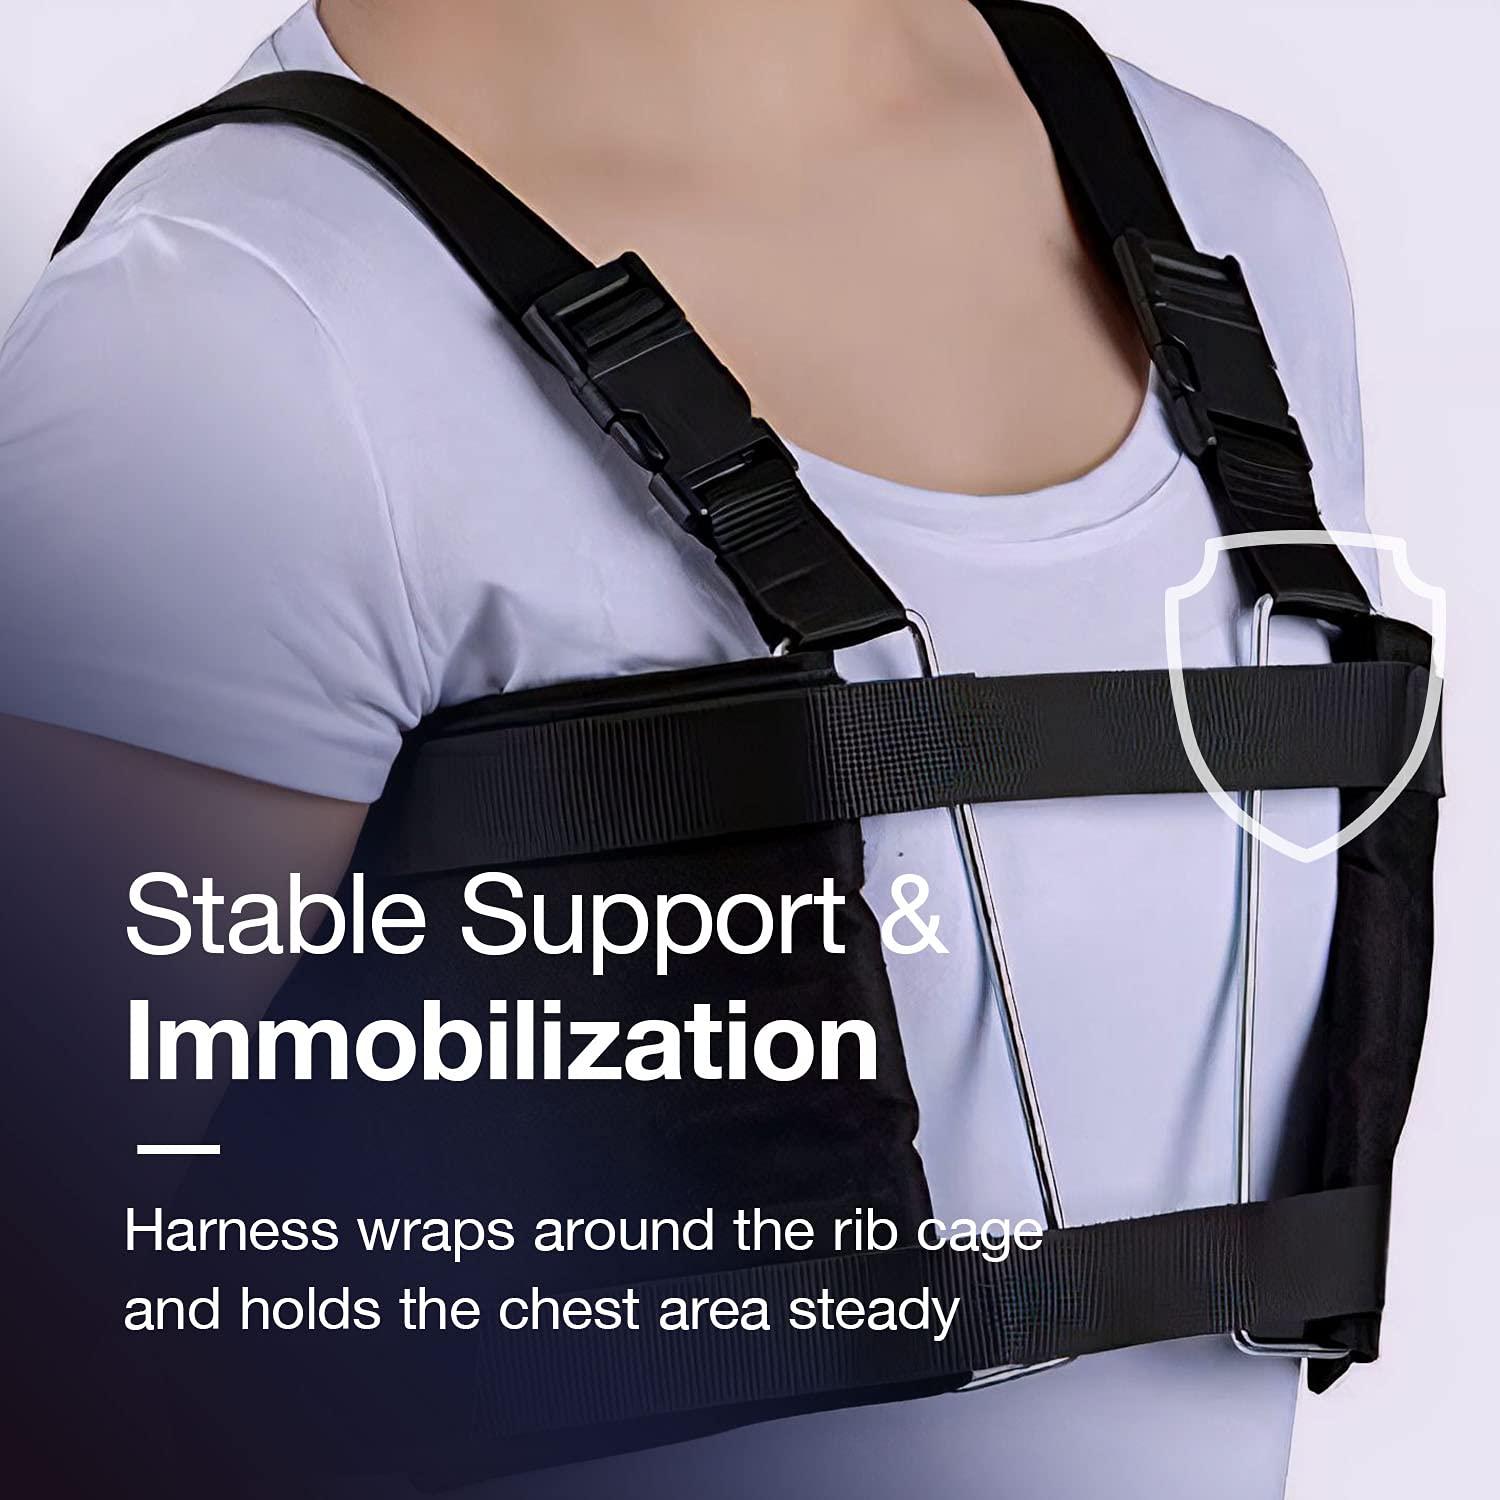 Buy Armor Adult Unisex Chest Support Brace with 2 Metal Inserts to  Stabilize the Thorax after Open Heart Surgery, Thoracic Procedure, or  Fractures of the Sternum or Rib Cage, Tan Color, Size